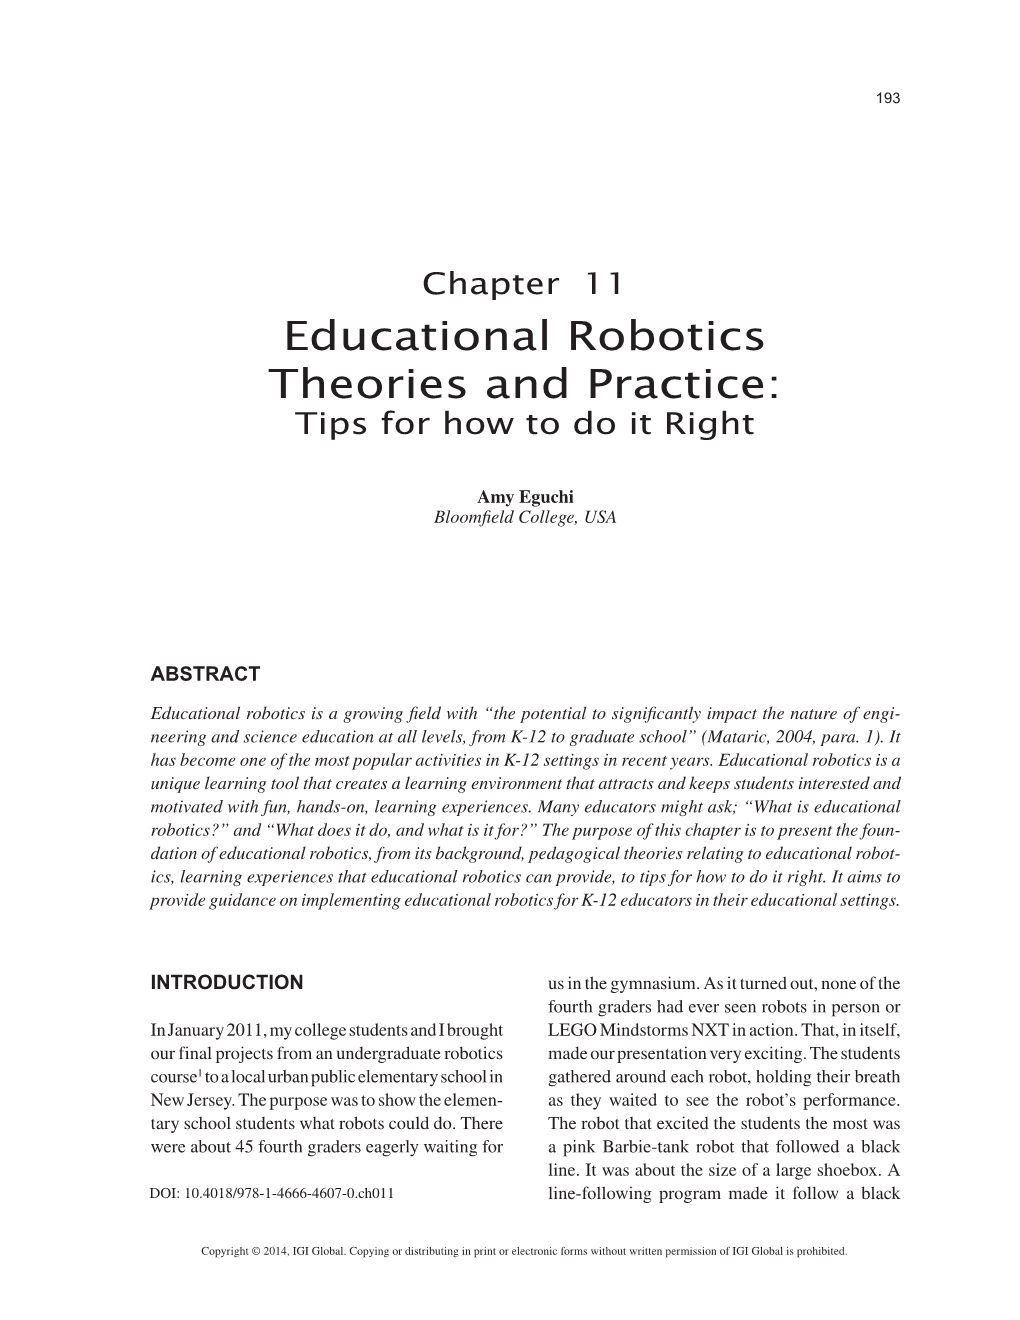 Educational Robotics Theories and Practice: Tips for How to Do It Right